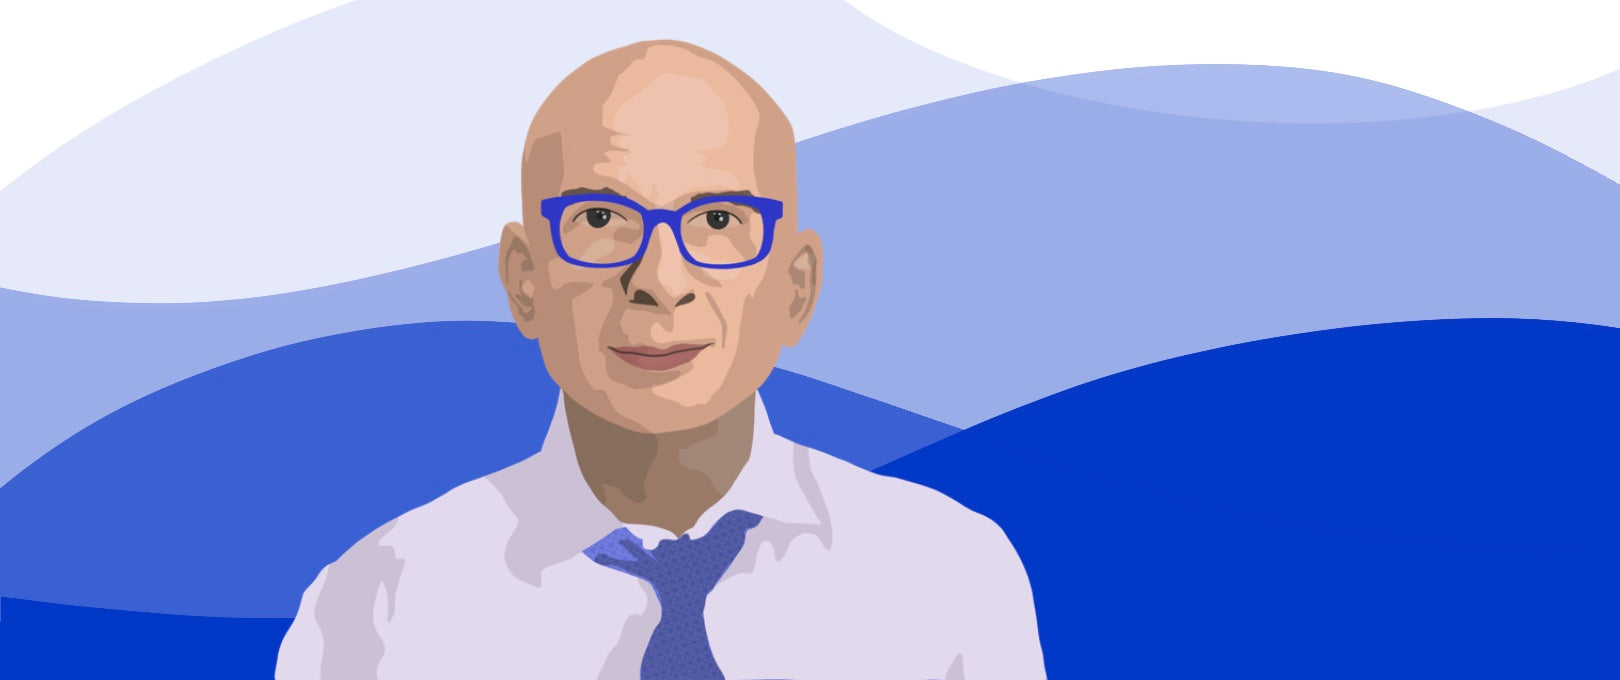 Seth Godin on Tribes, Leadership in Crisis, and Running the Perfect Zoom Meeting